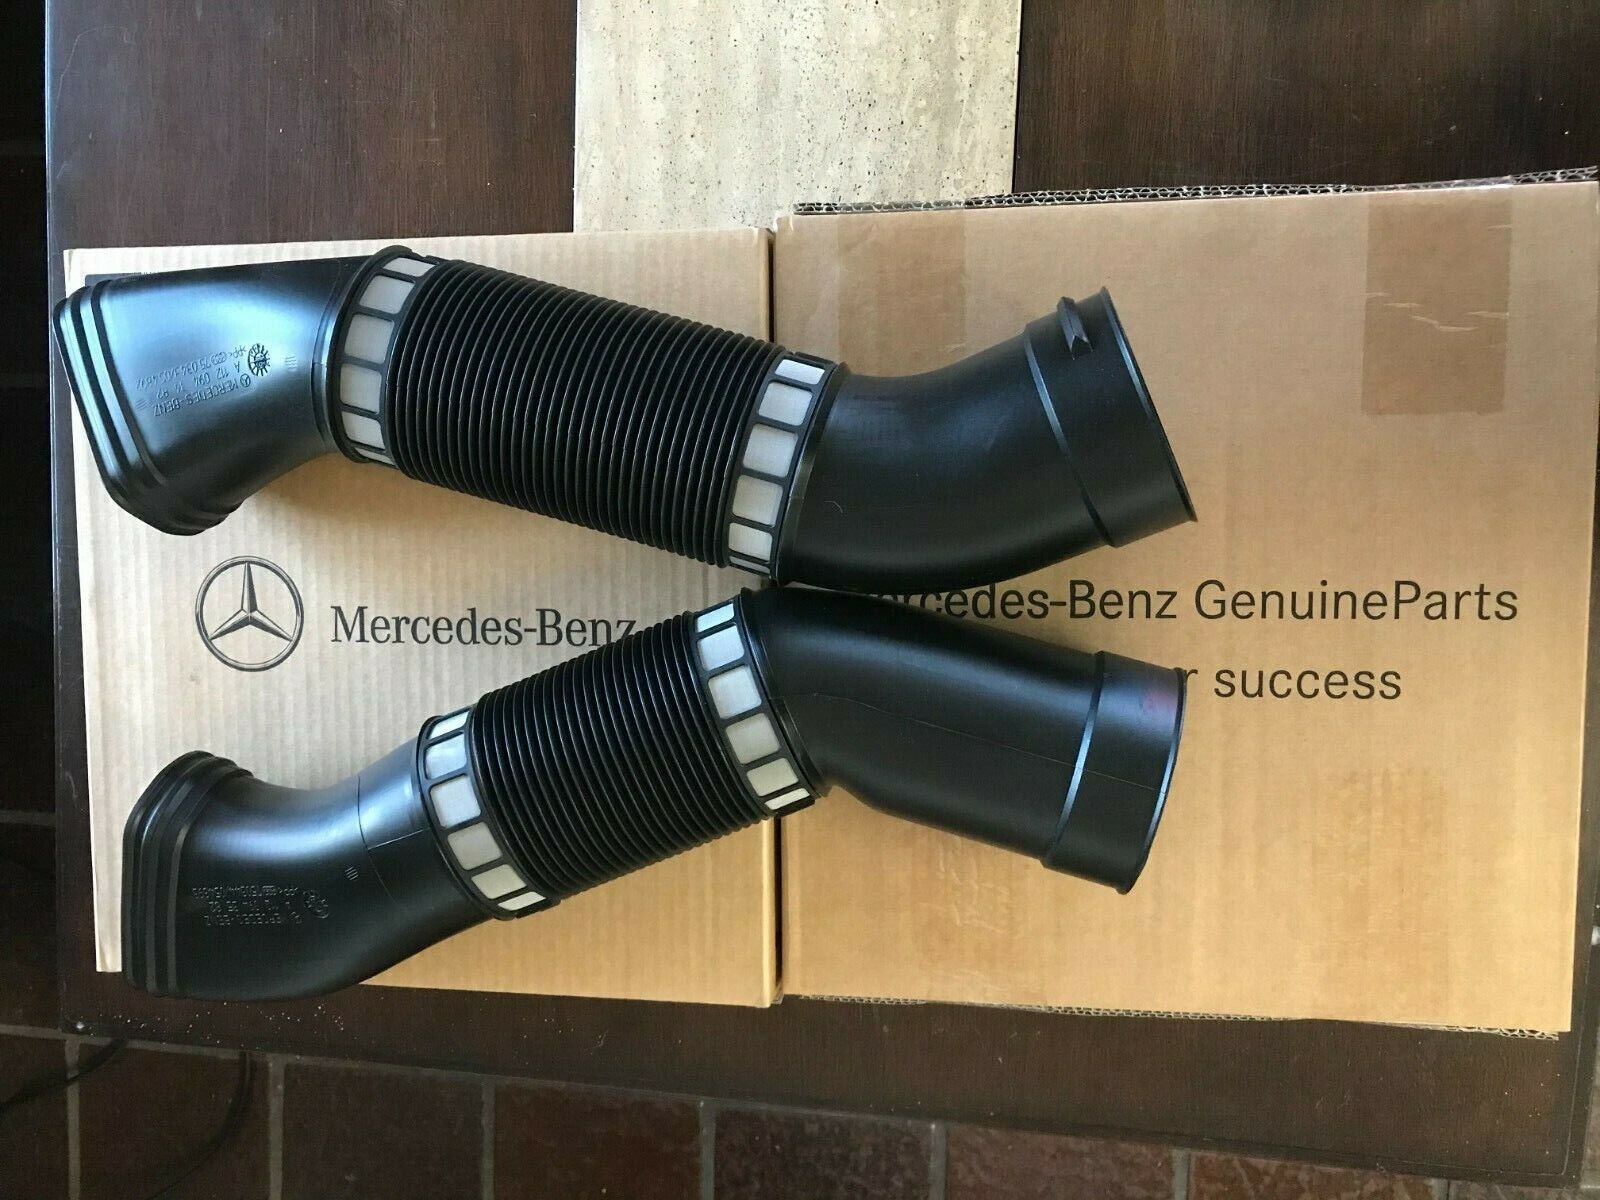 Genuine Mercedes Air Filter Intake Duct Tube Hose Set for W211 E320 + Others